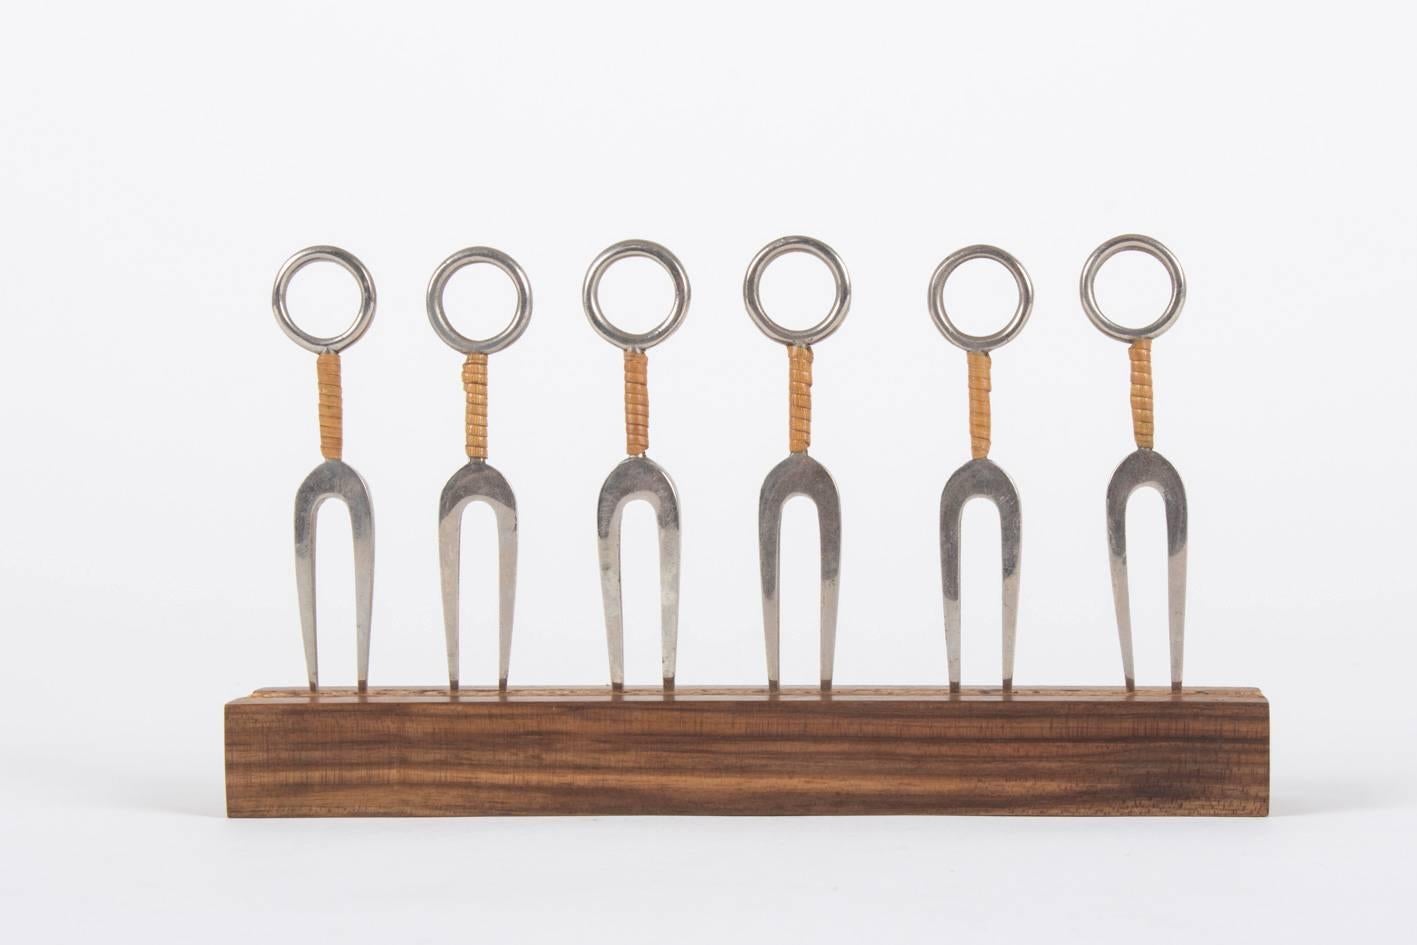 This striking set consists of the walnut and cork filled holder bar and the six nickel-plated and rattan wrapped handles. Designed and executed by the Auböck workshop Vienna, circa 1950s.